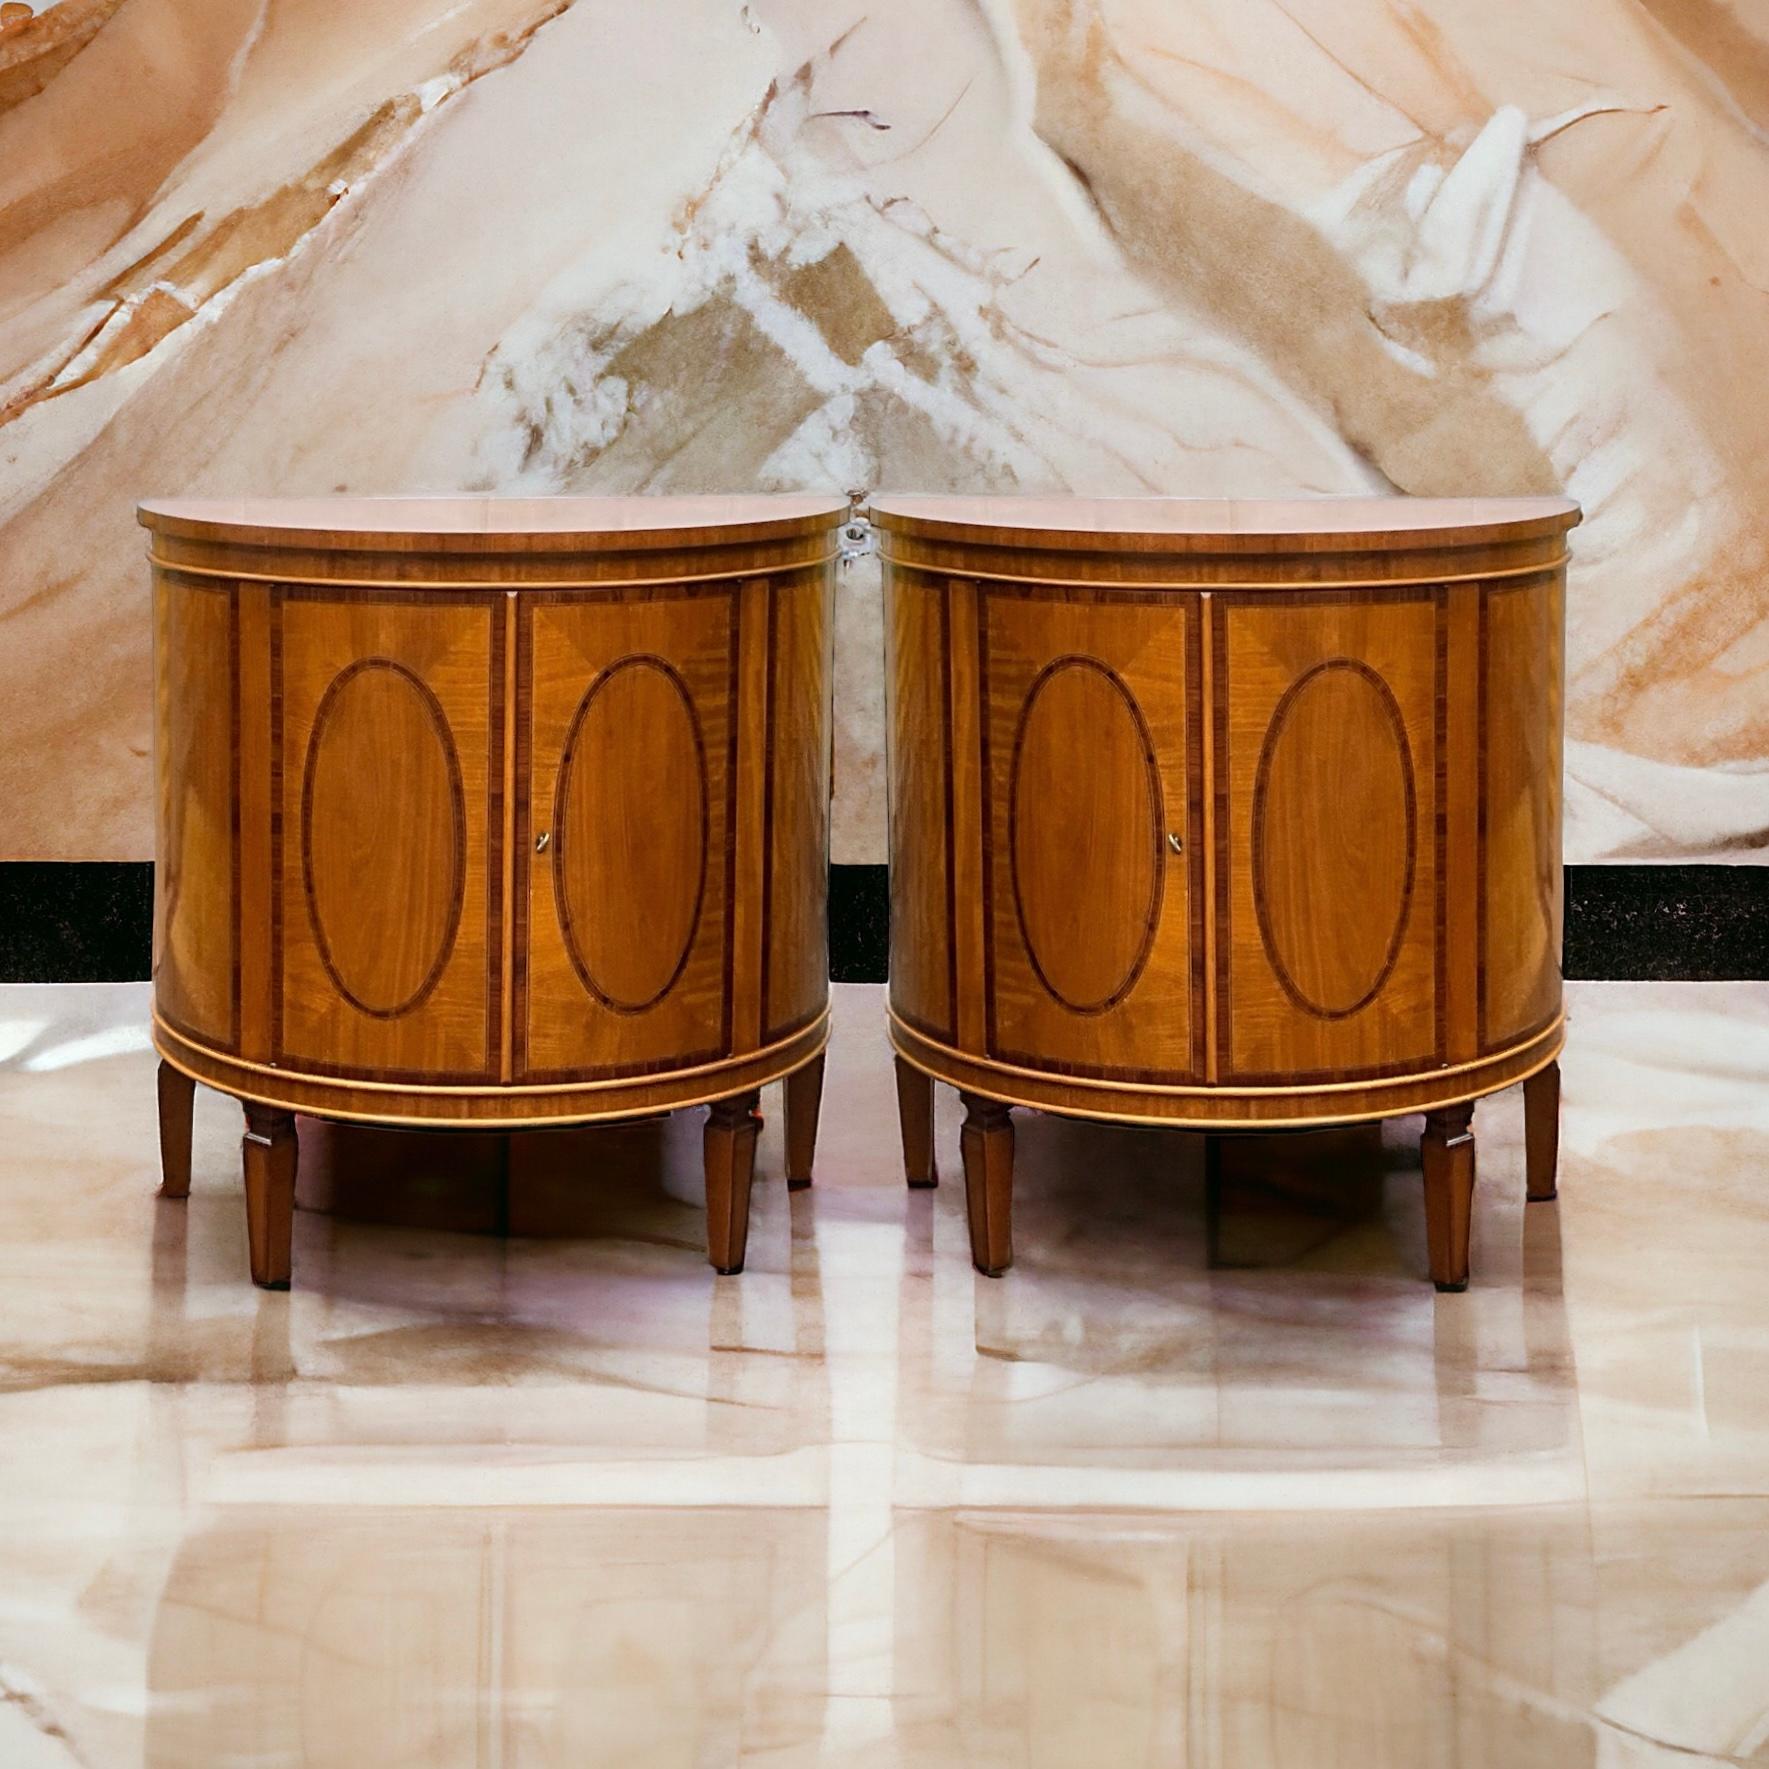 Italian Banded & Inlaid Satinwood Demilune Cabinets Att. Decorative Crafts -Pair For Sale 1